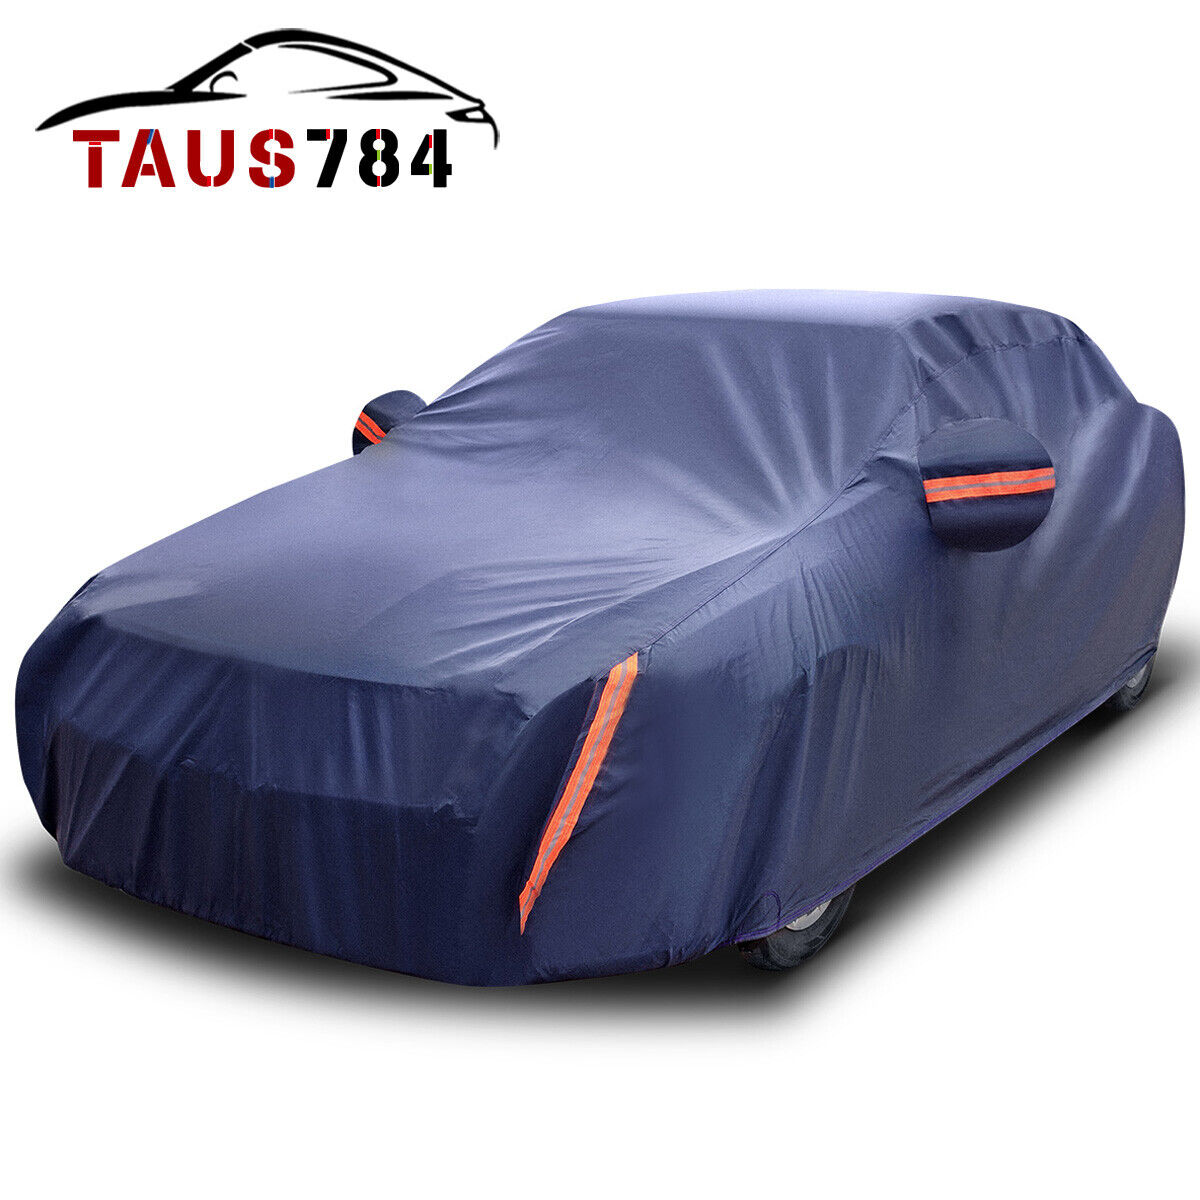 Full Car Cover Waterproof Dust-proof UV Resistant Outdoor All Weather Protection